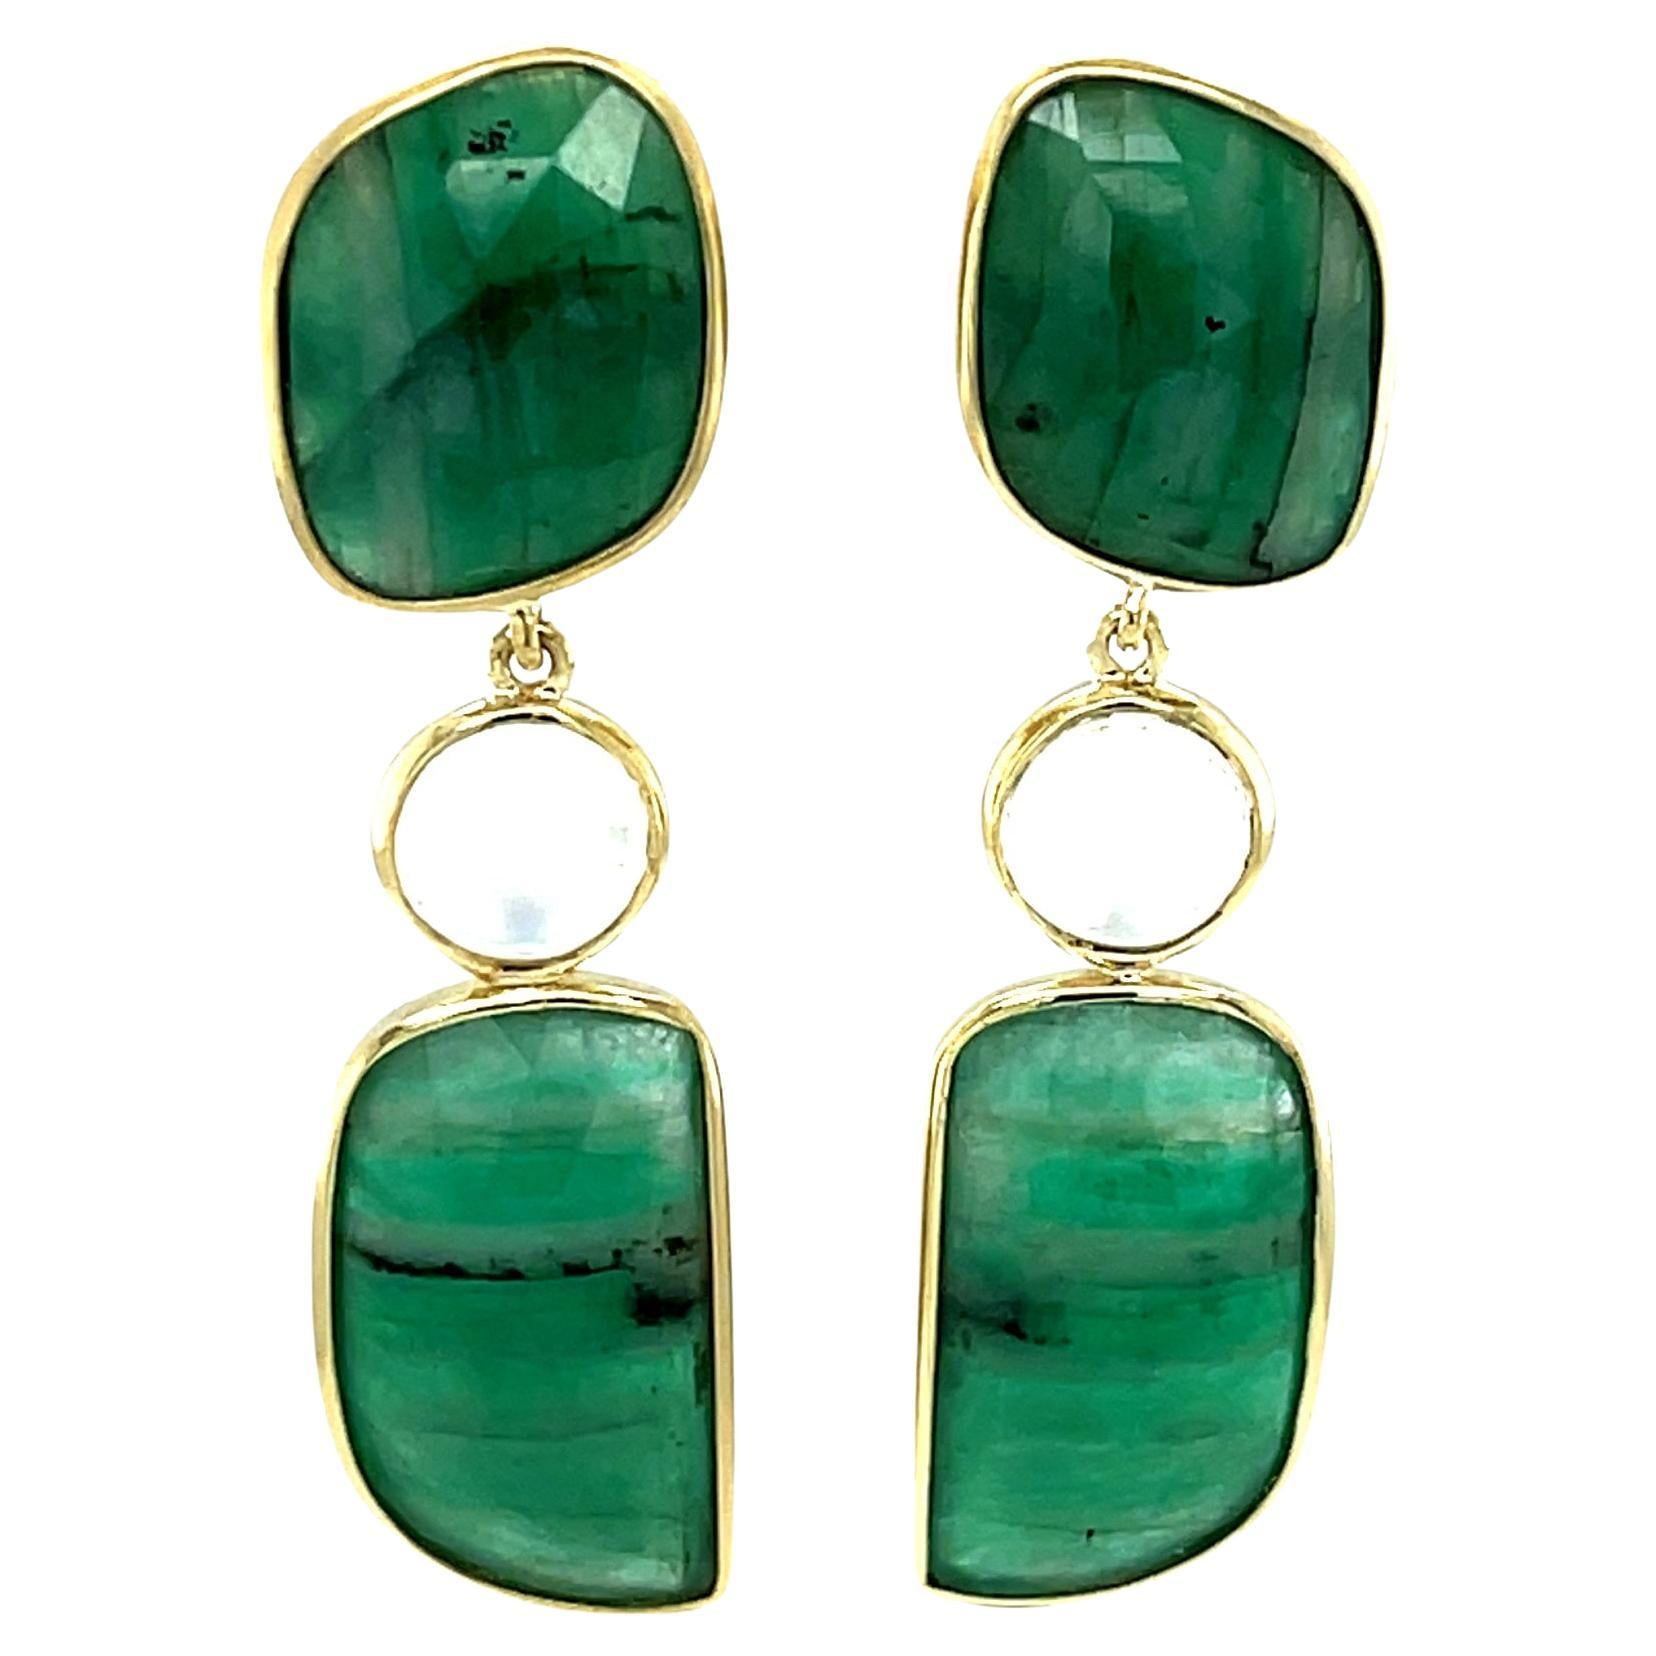 Faceted Emerald Slice and Rainbow Moonstone Dangle Earrings in 18k Yellow Gold